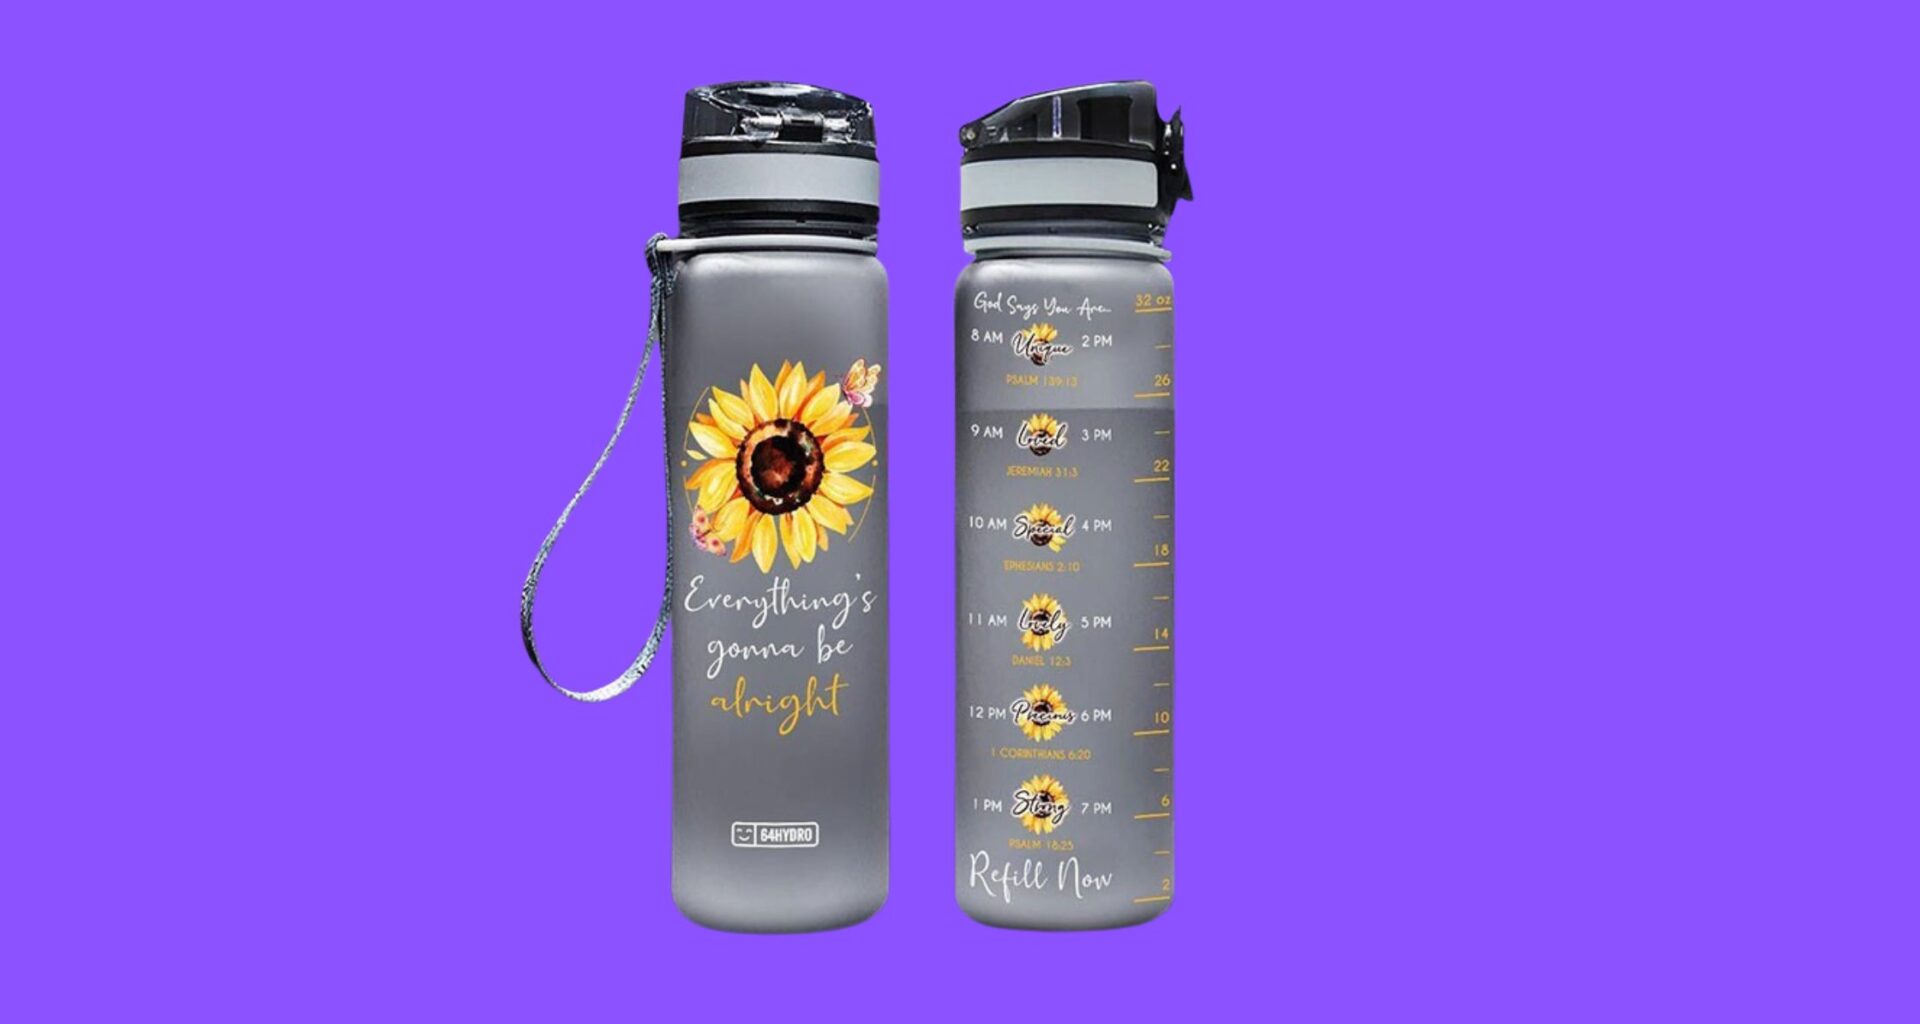 10 Innovative Water Bottle Ideas - Check Out Here!